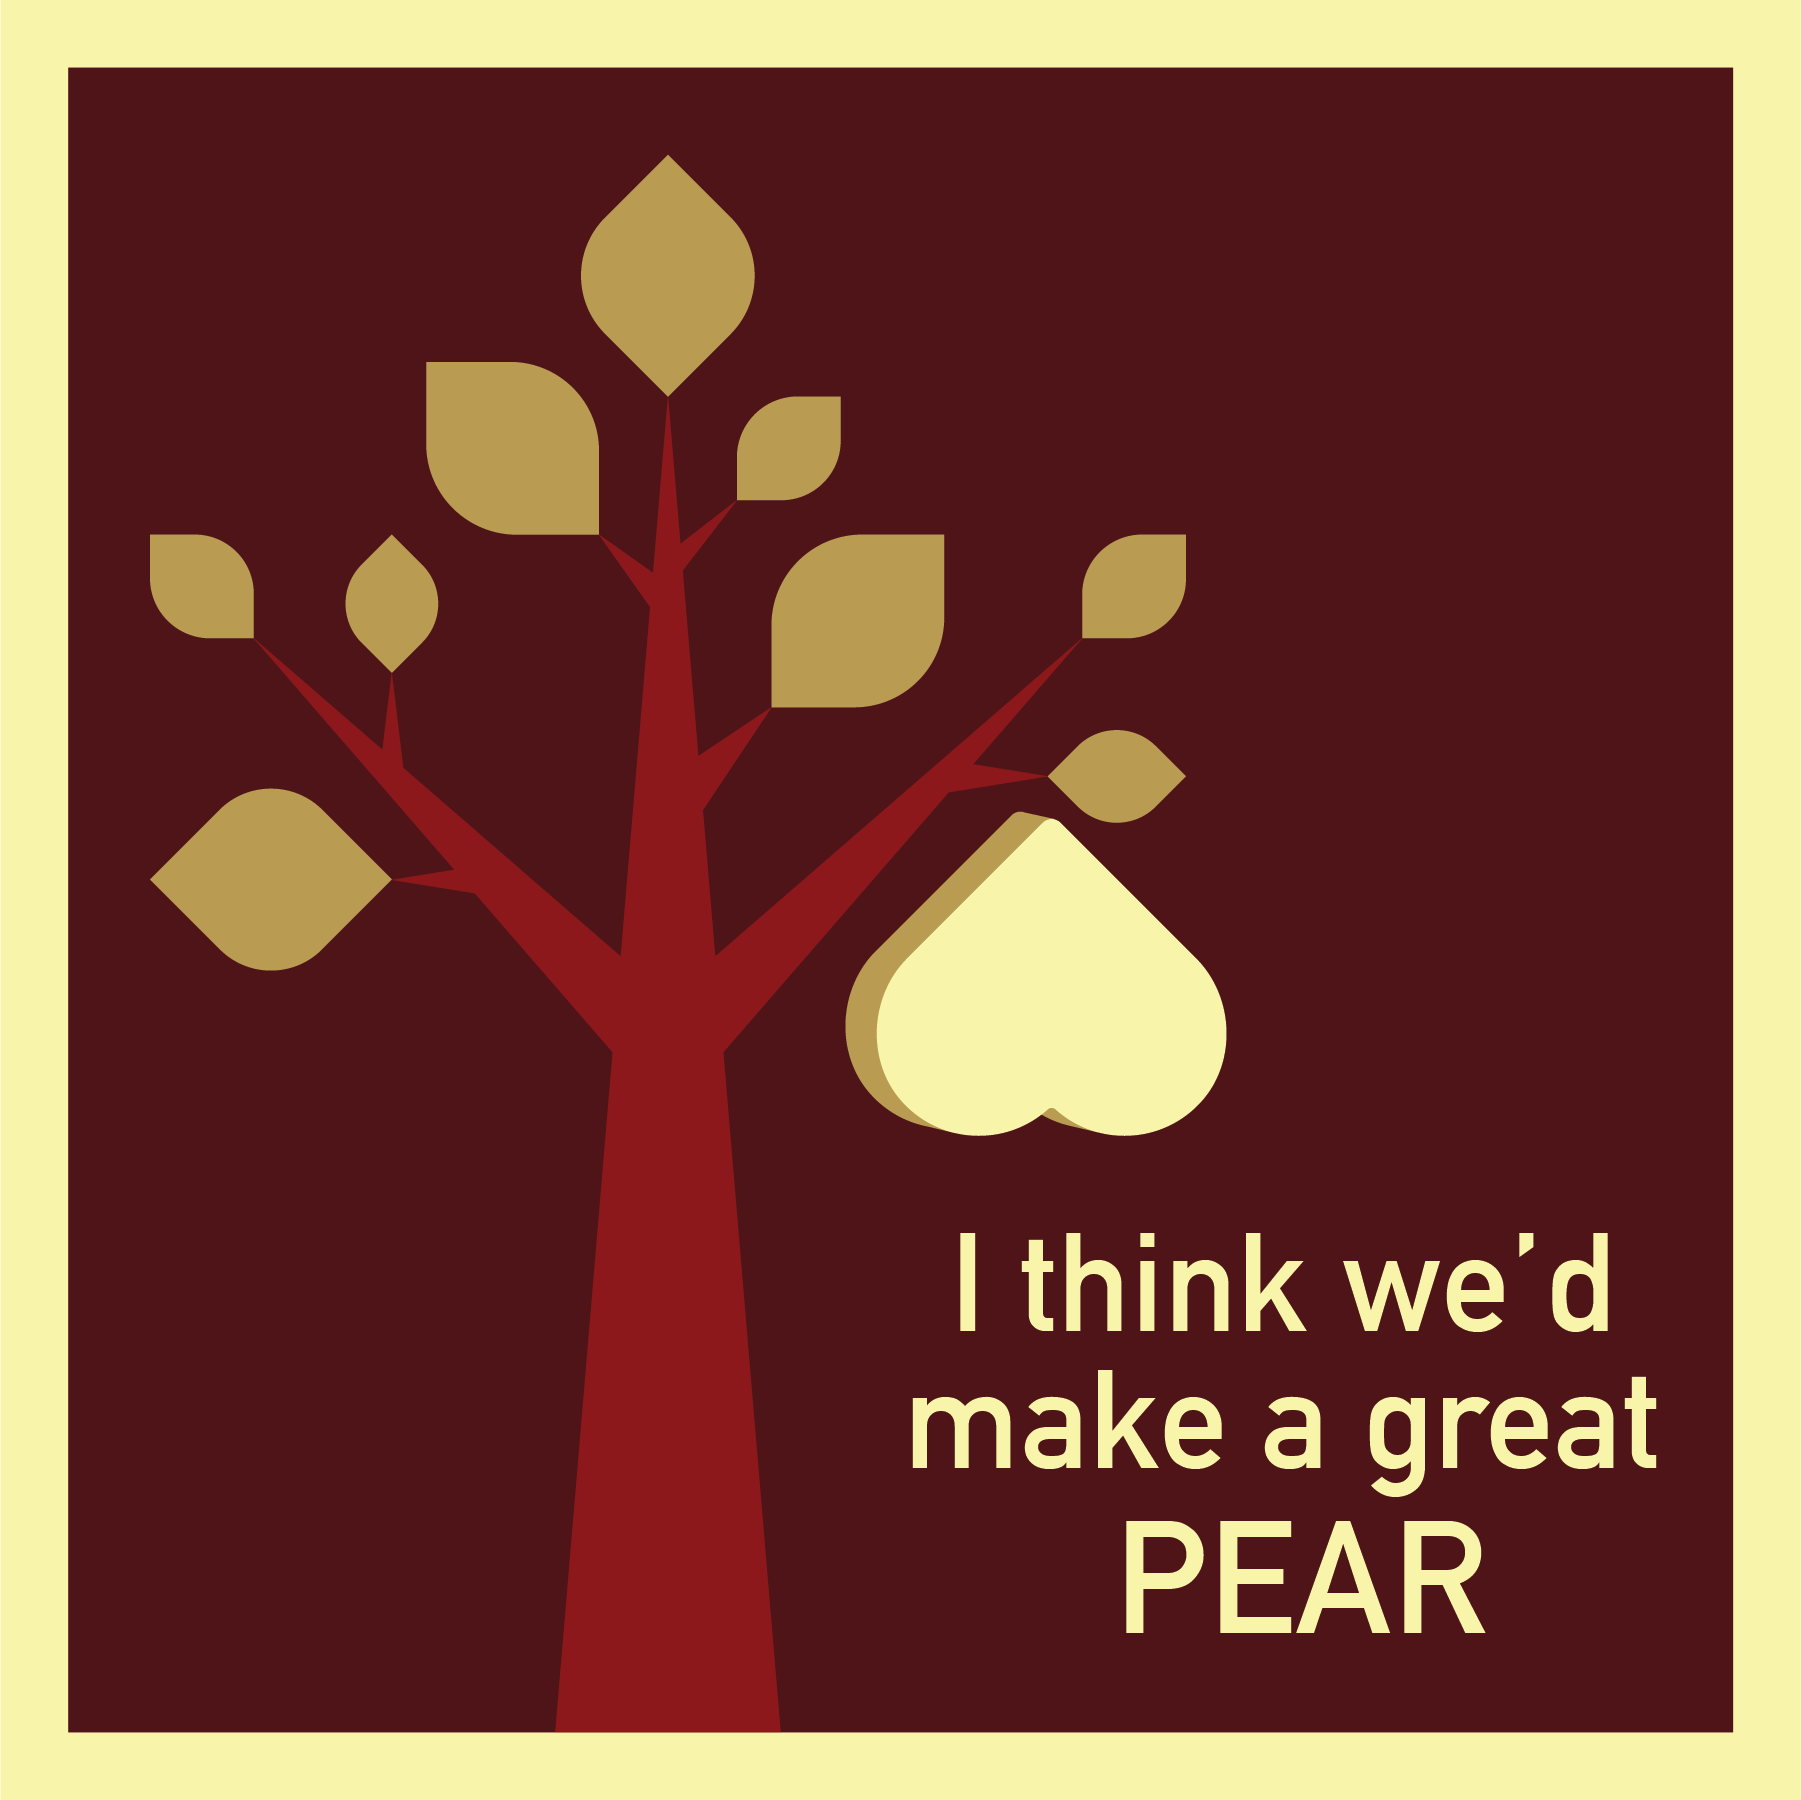 "I think we'd make a great PEAR" with a heart like a fruit hanging on the branch of a tree.